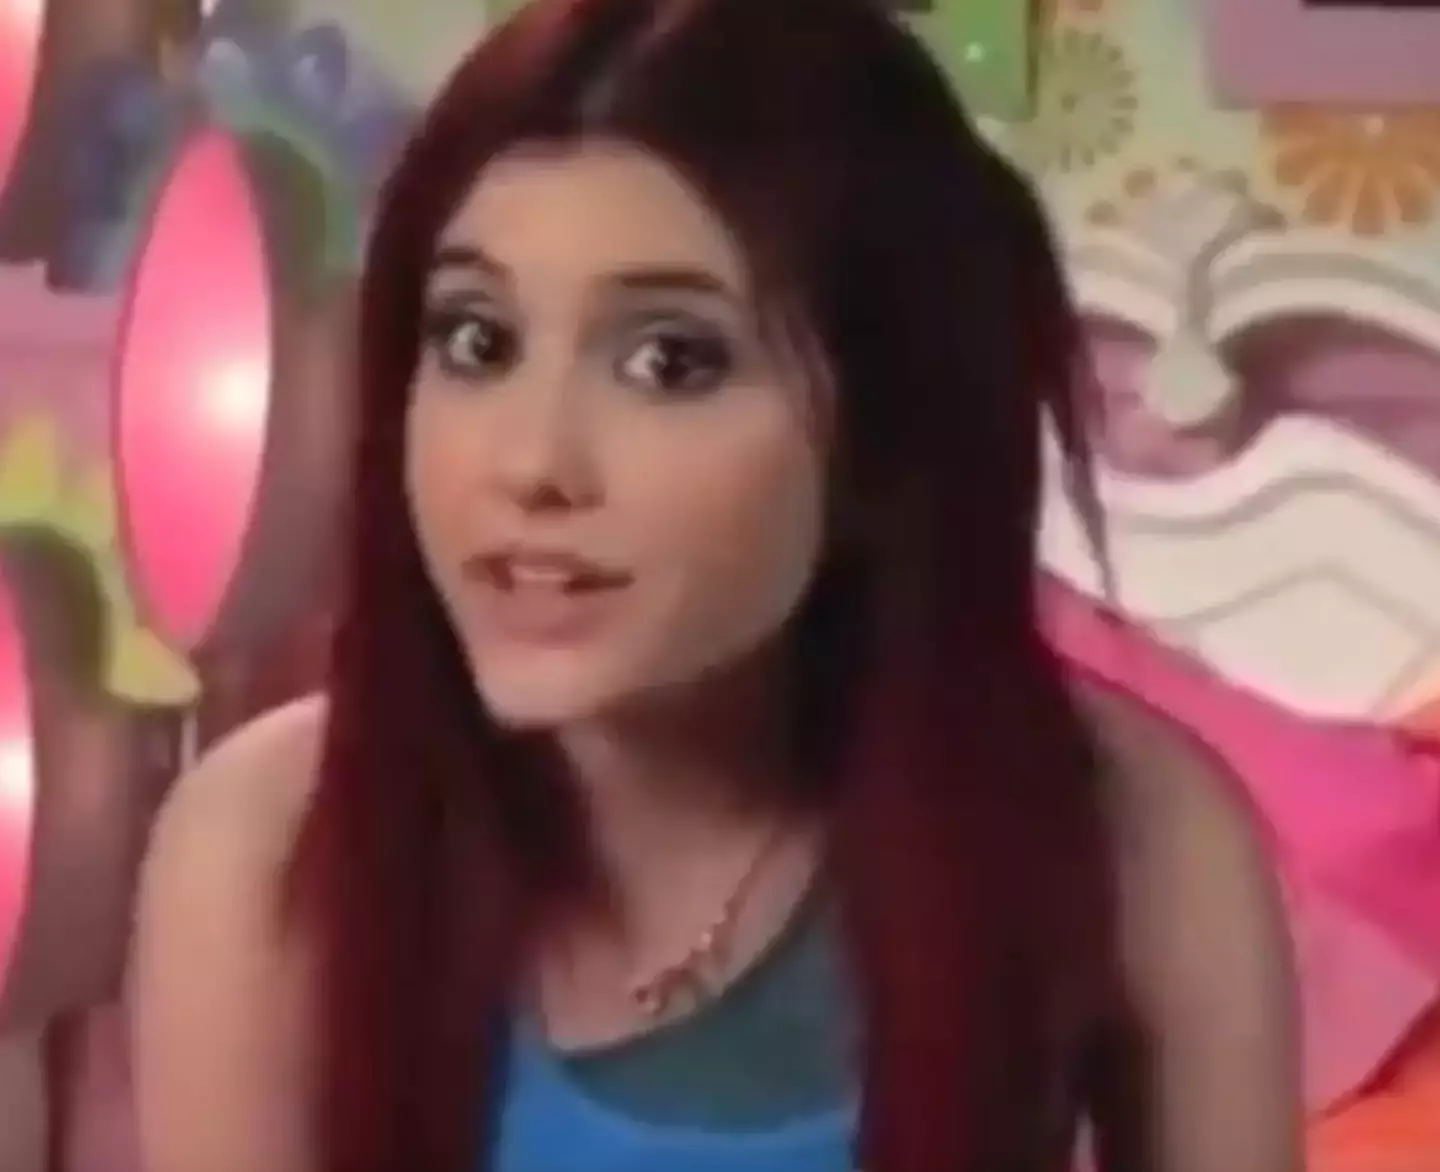 Uncomfortable clips of Ariana Grande have resurfaced.